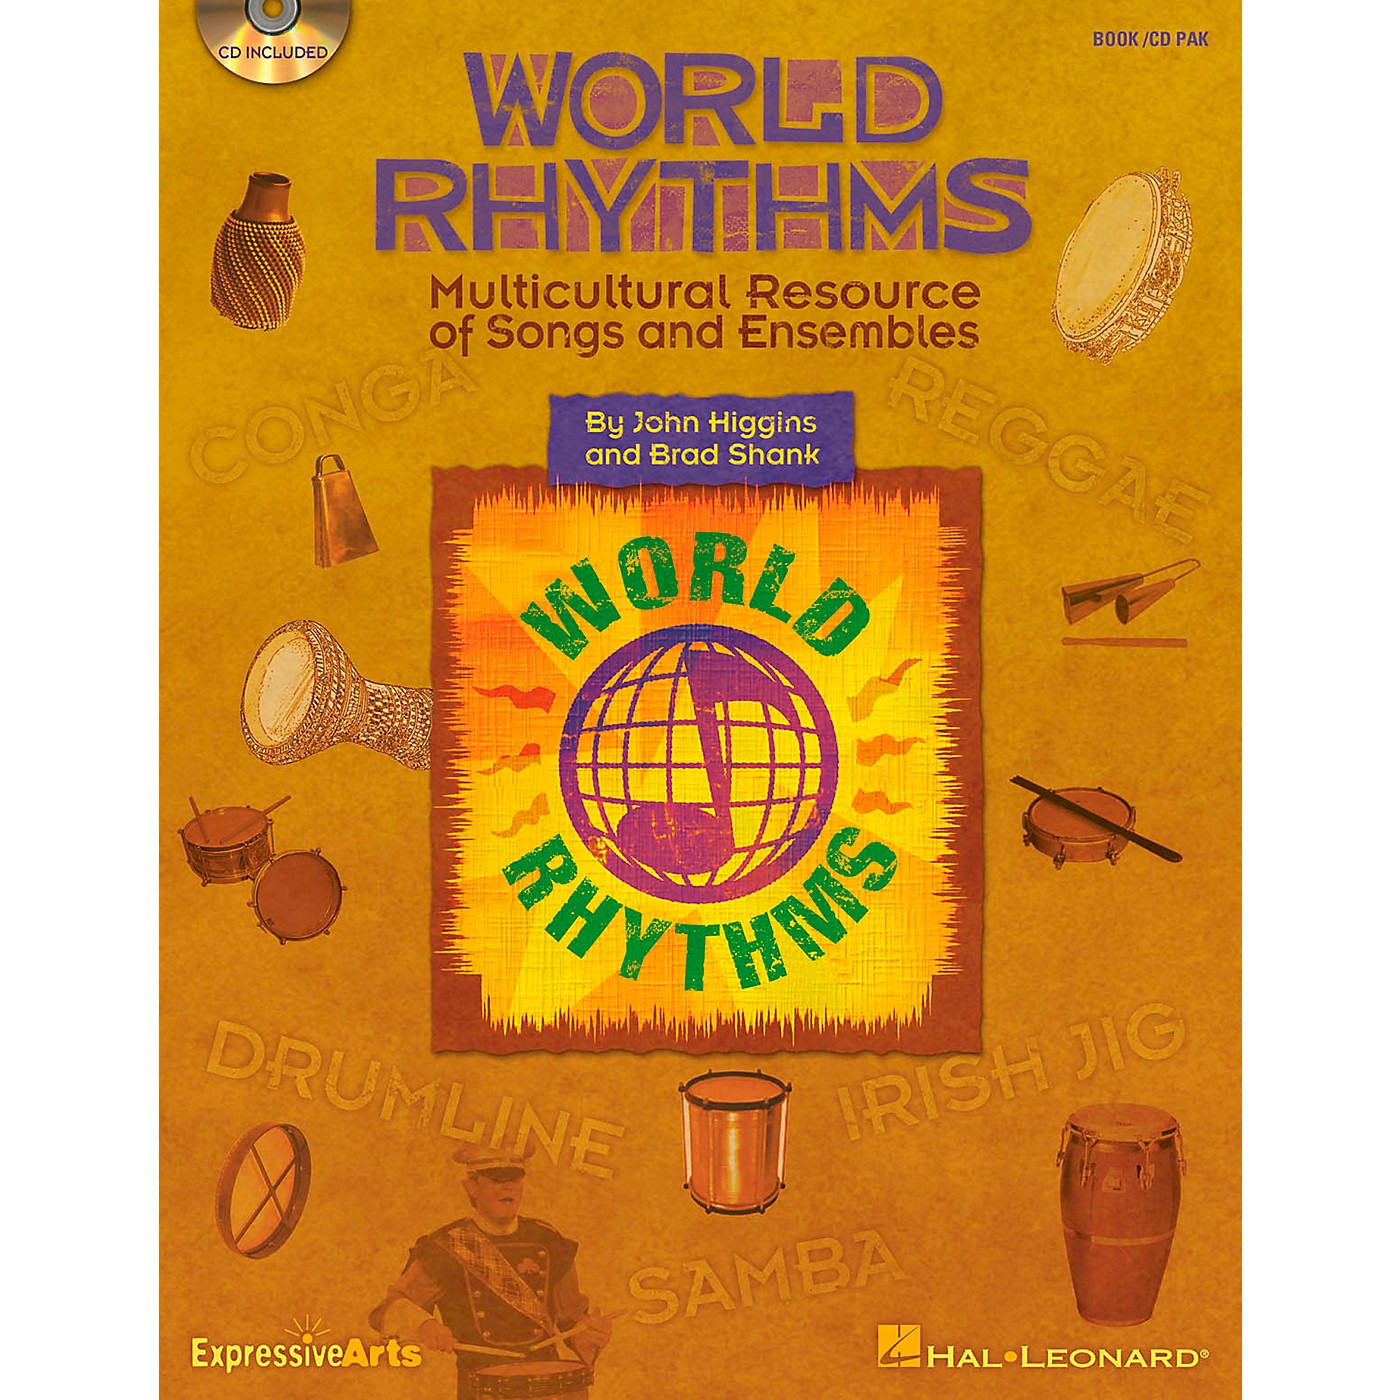 Hal Leonard World Rhythms - Multicultural Resource of Songs and Ensembles (Book/CD) thumbnail